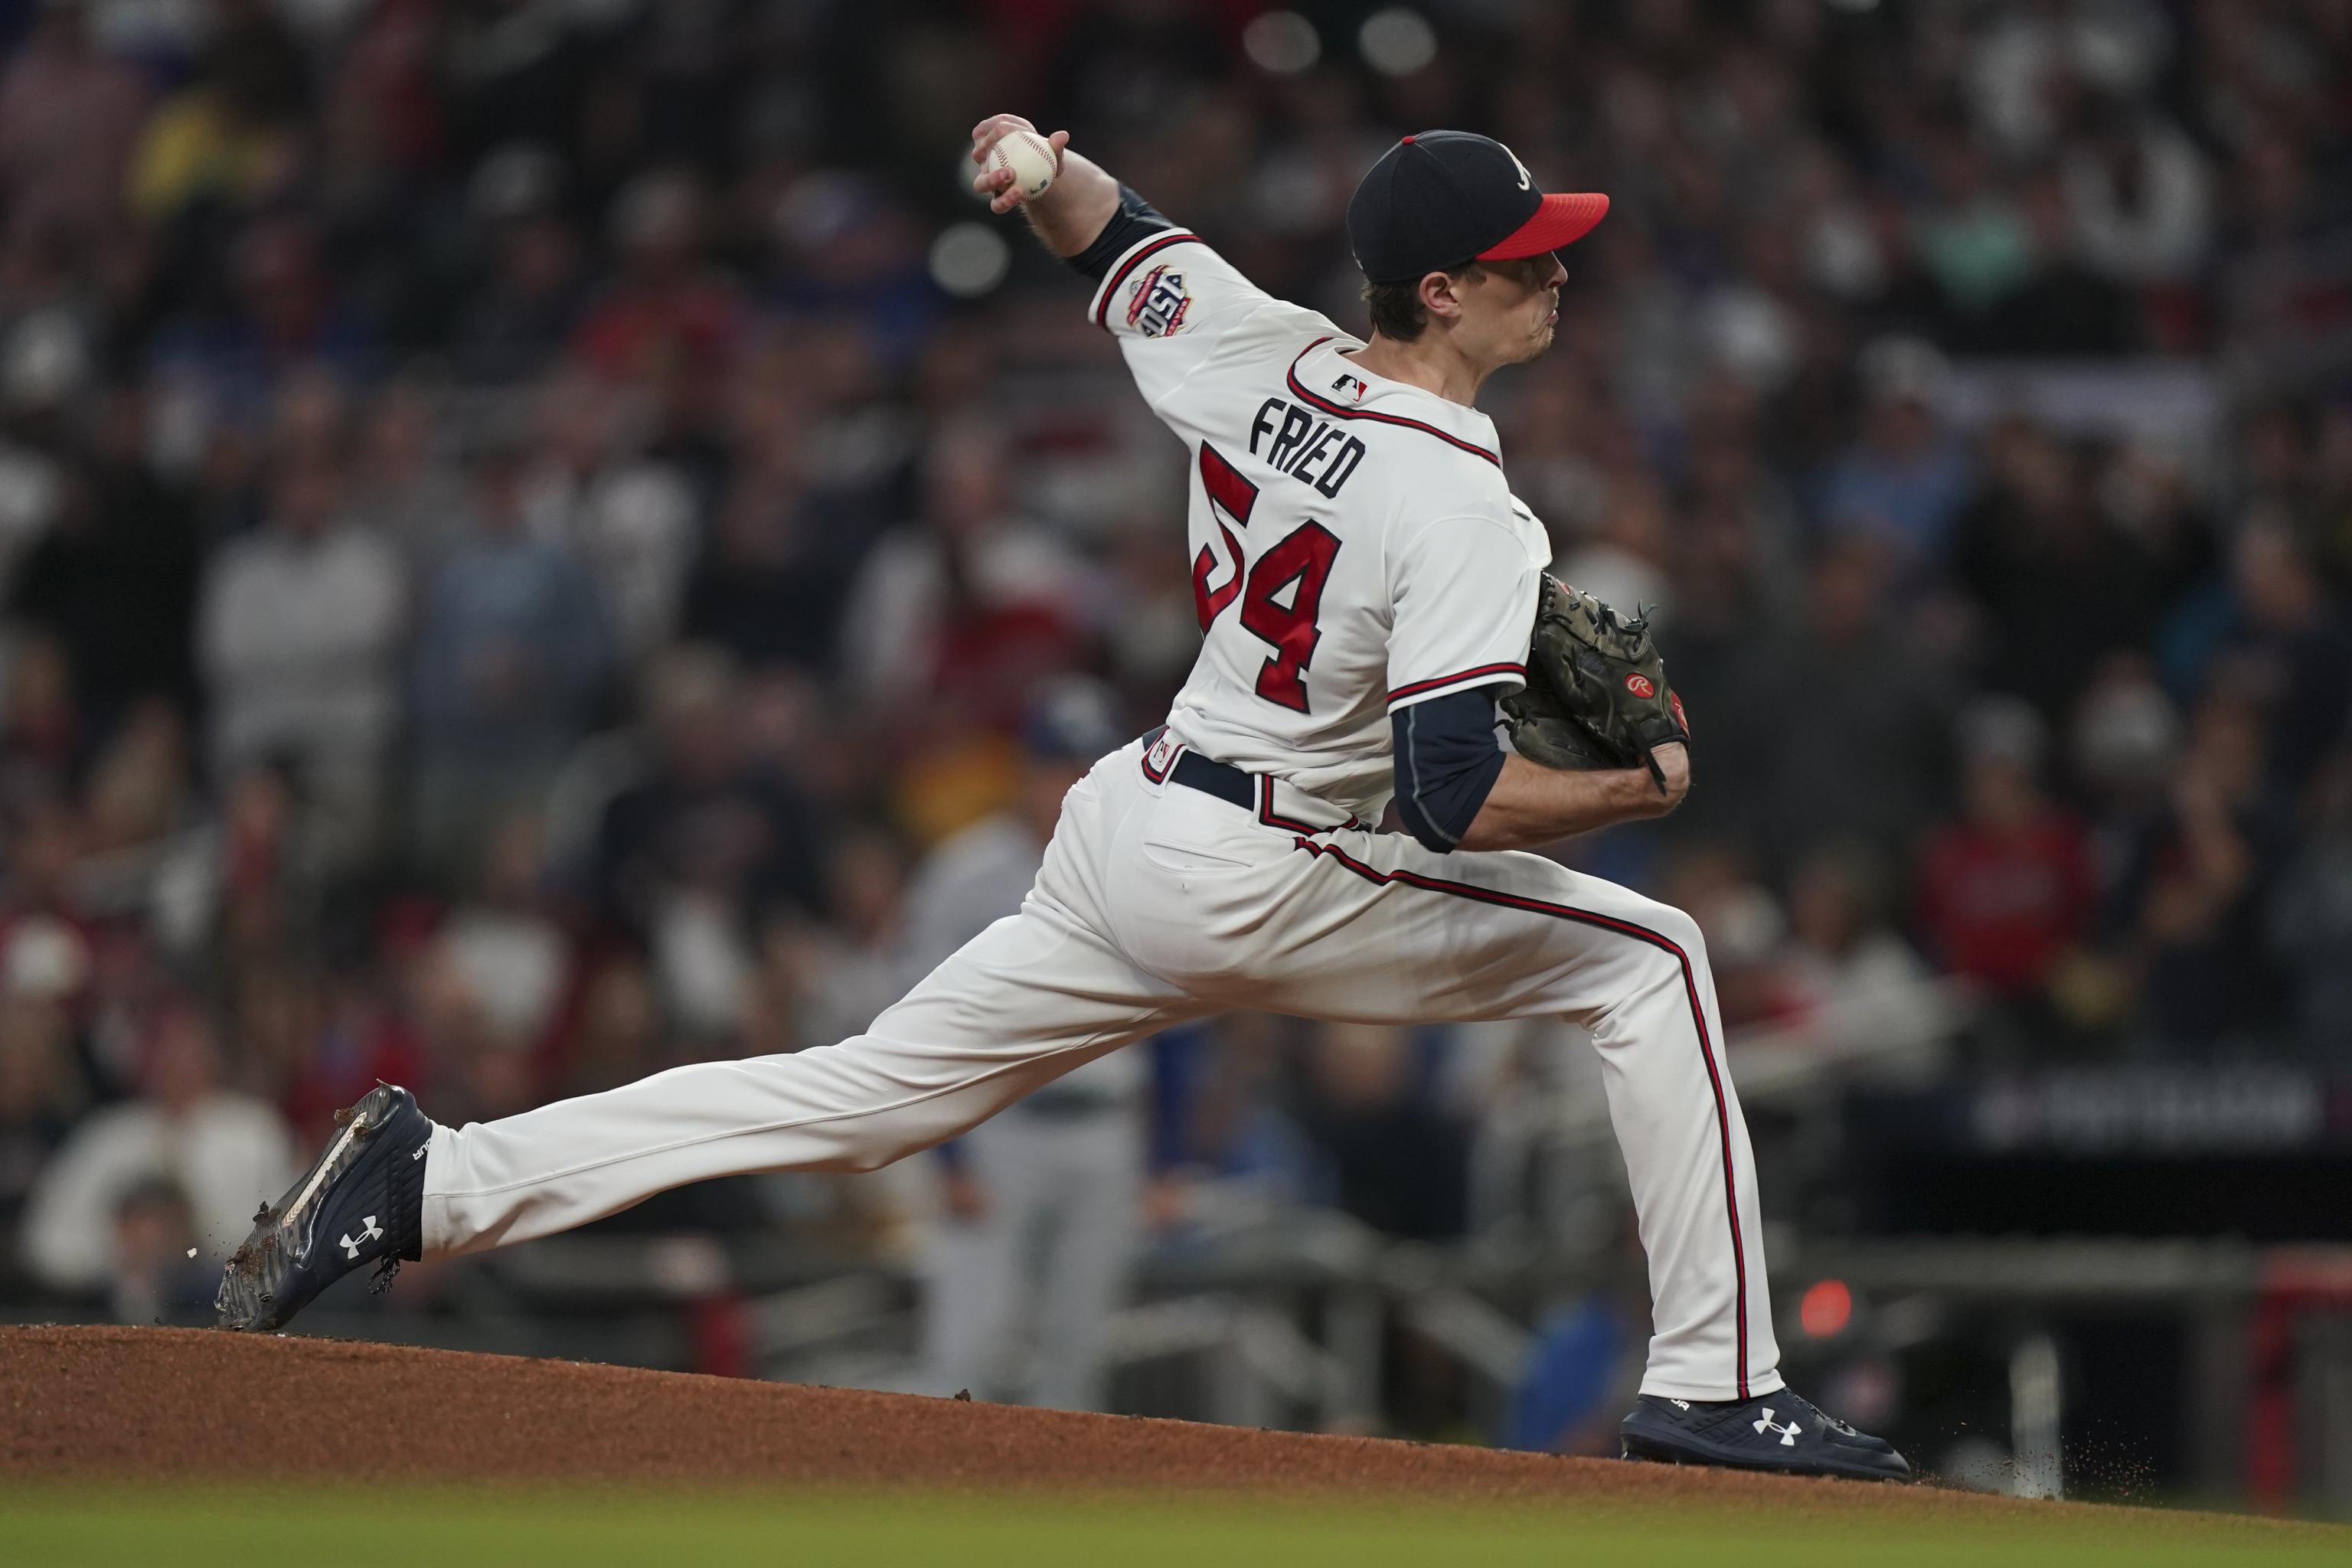 Max Fried Game 6 Reel, Max Fried turned in an epic performance in World  Series Game 6, tossing 6 shutout innings to silence the Astros lineup., By  Atlanta Braves Highlights